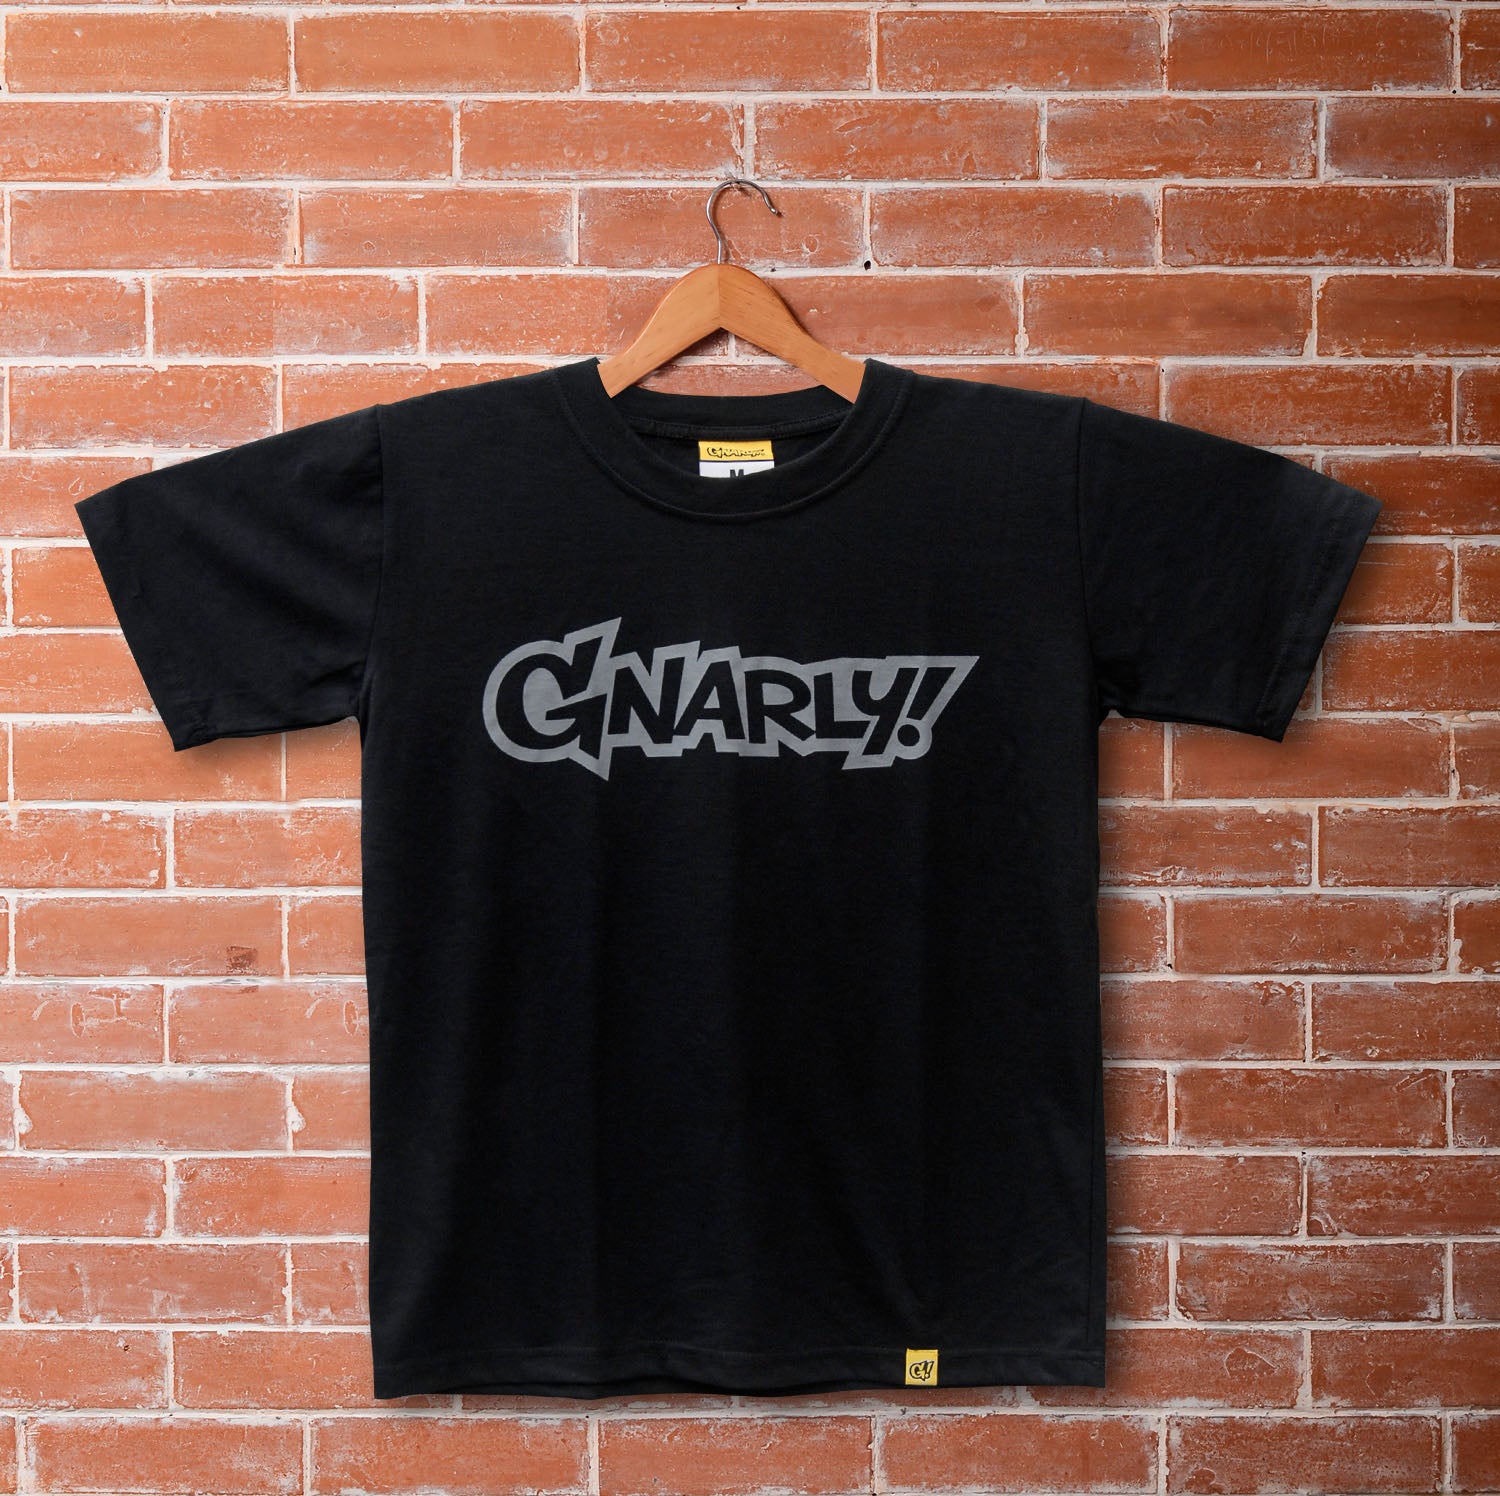 Wordmark Fossil – Gnarly! Clothing